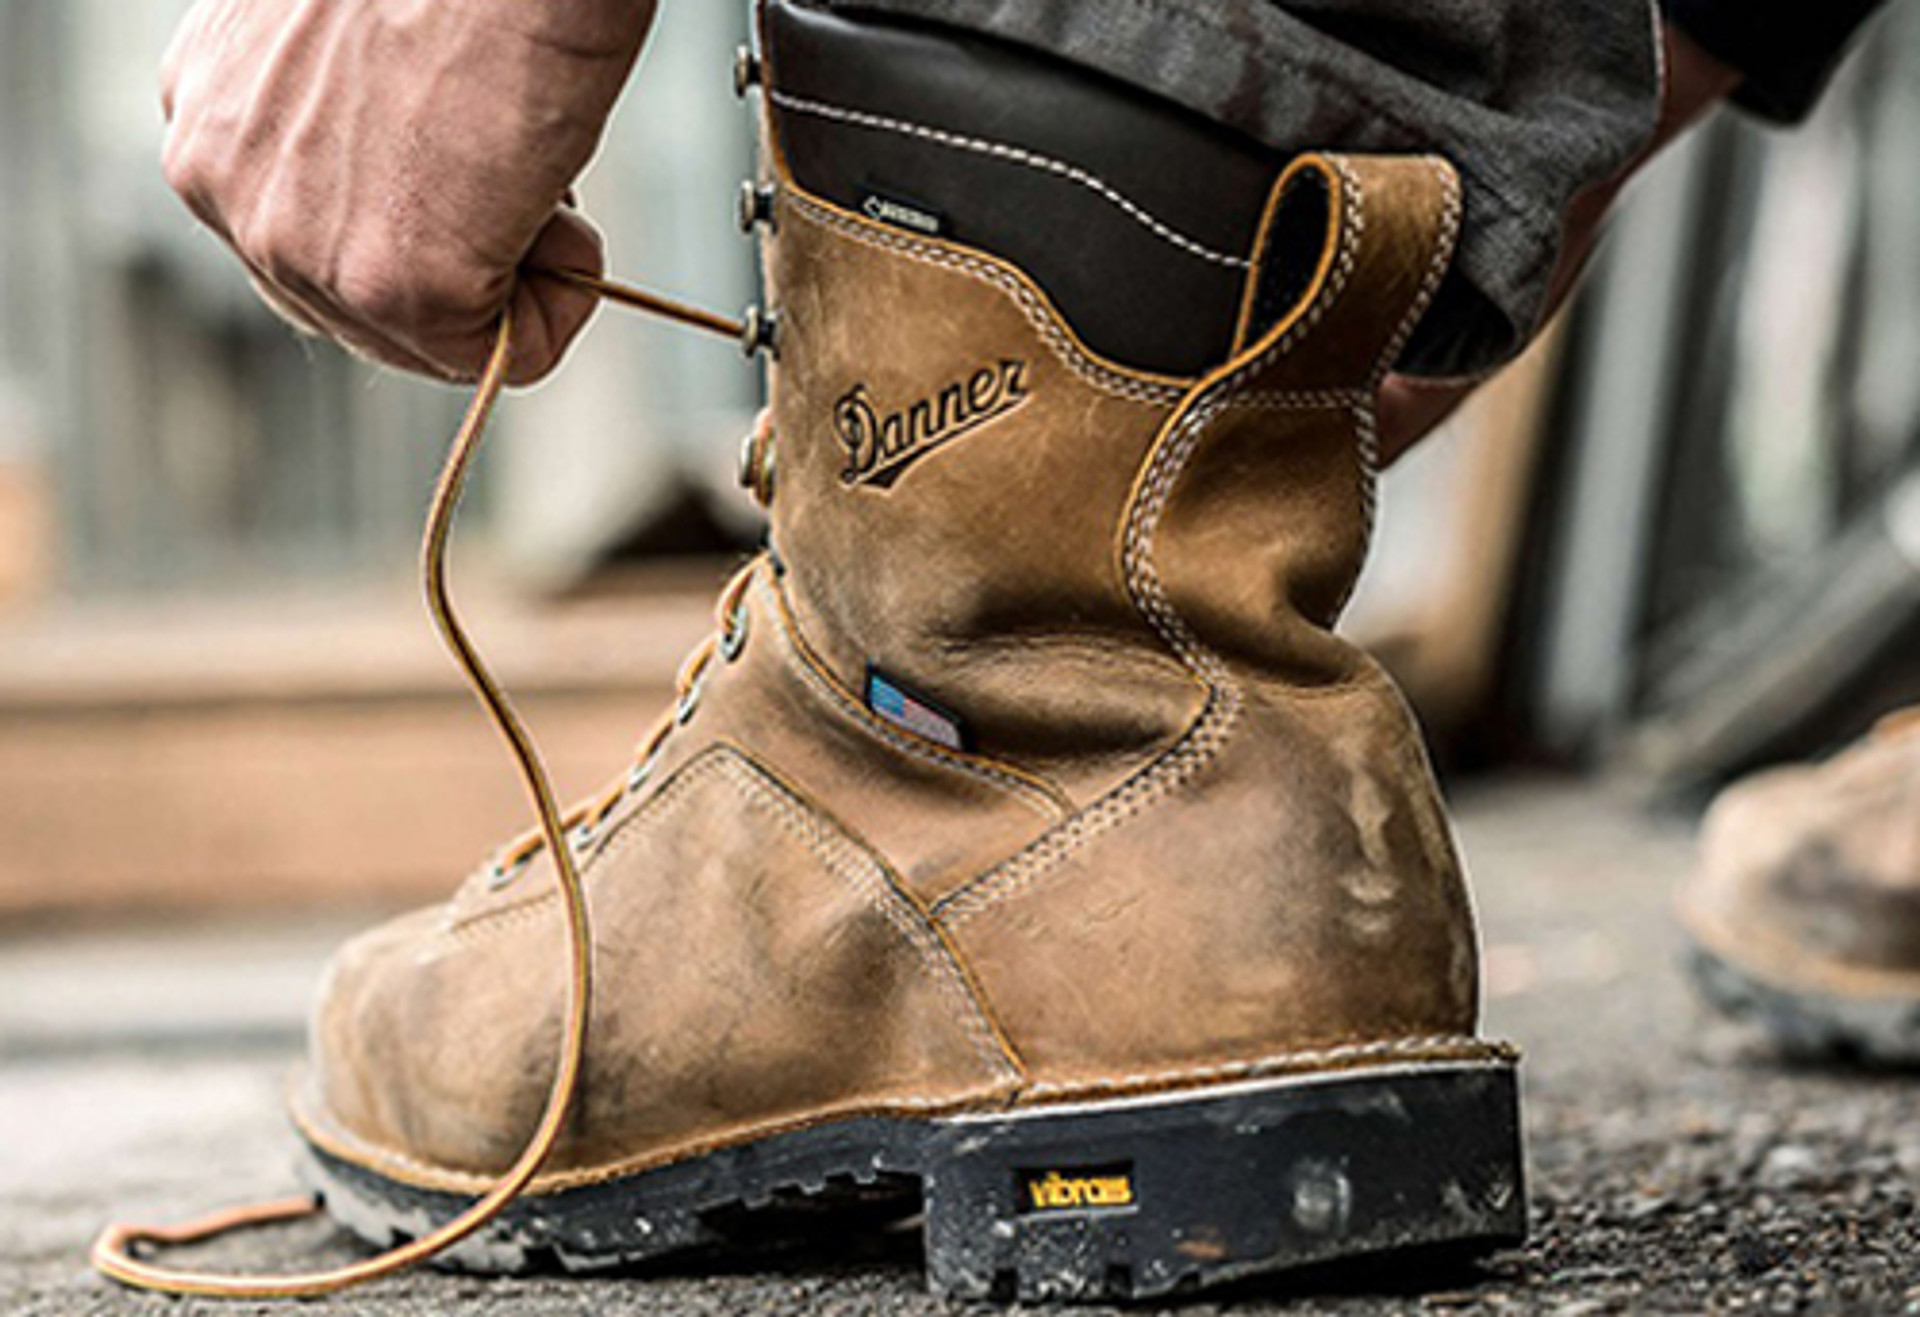 7 Best Landscaping and Landscape Construction Boots - Family Footwear